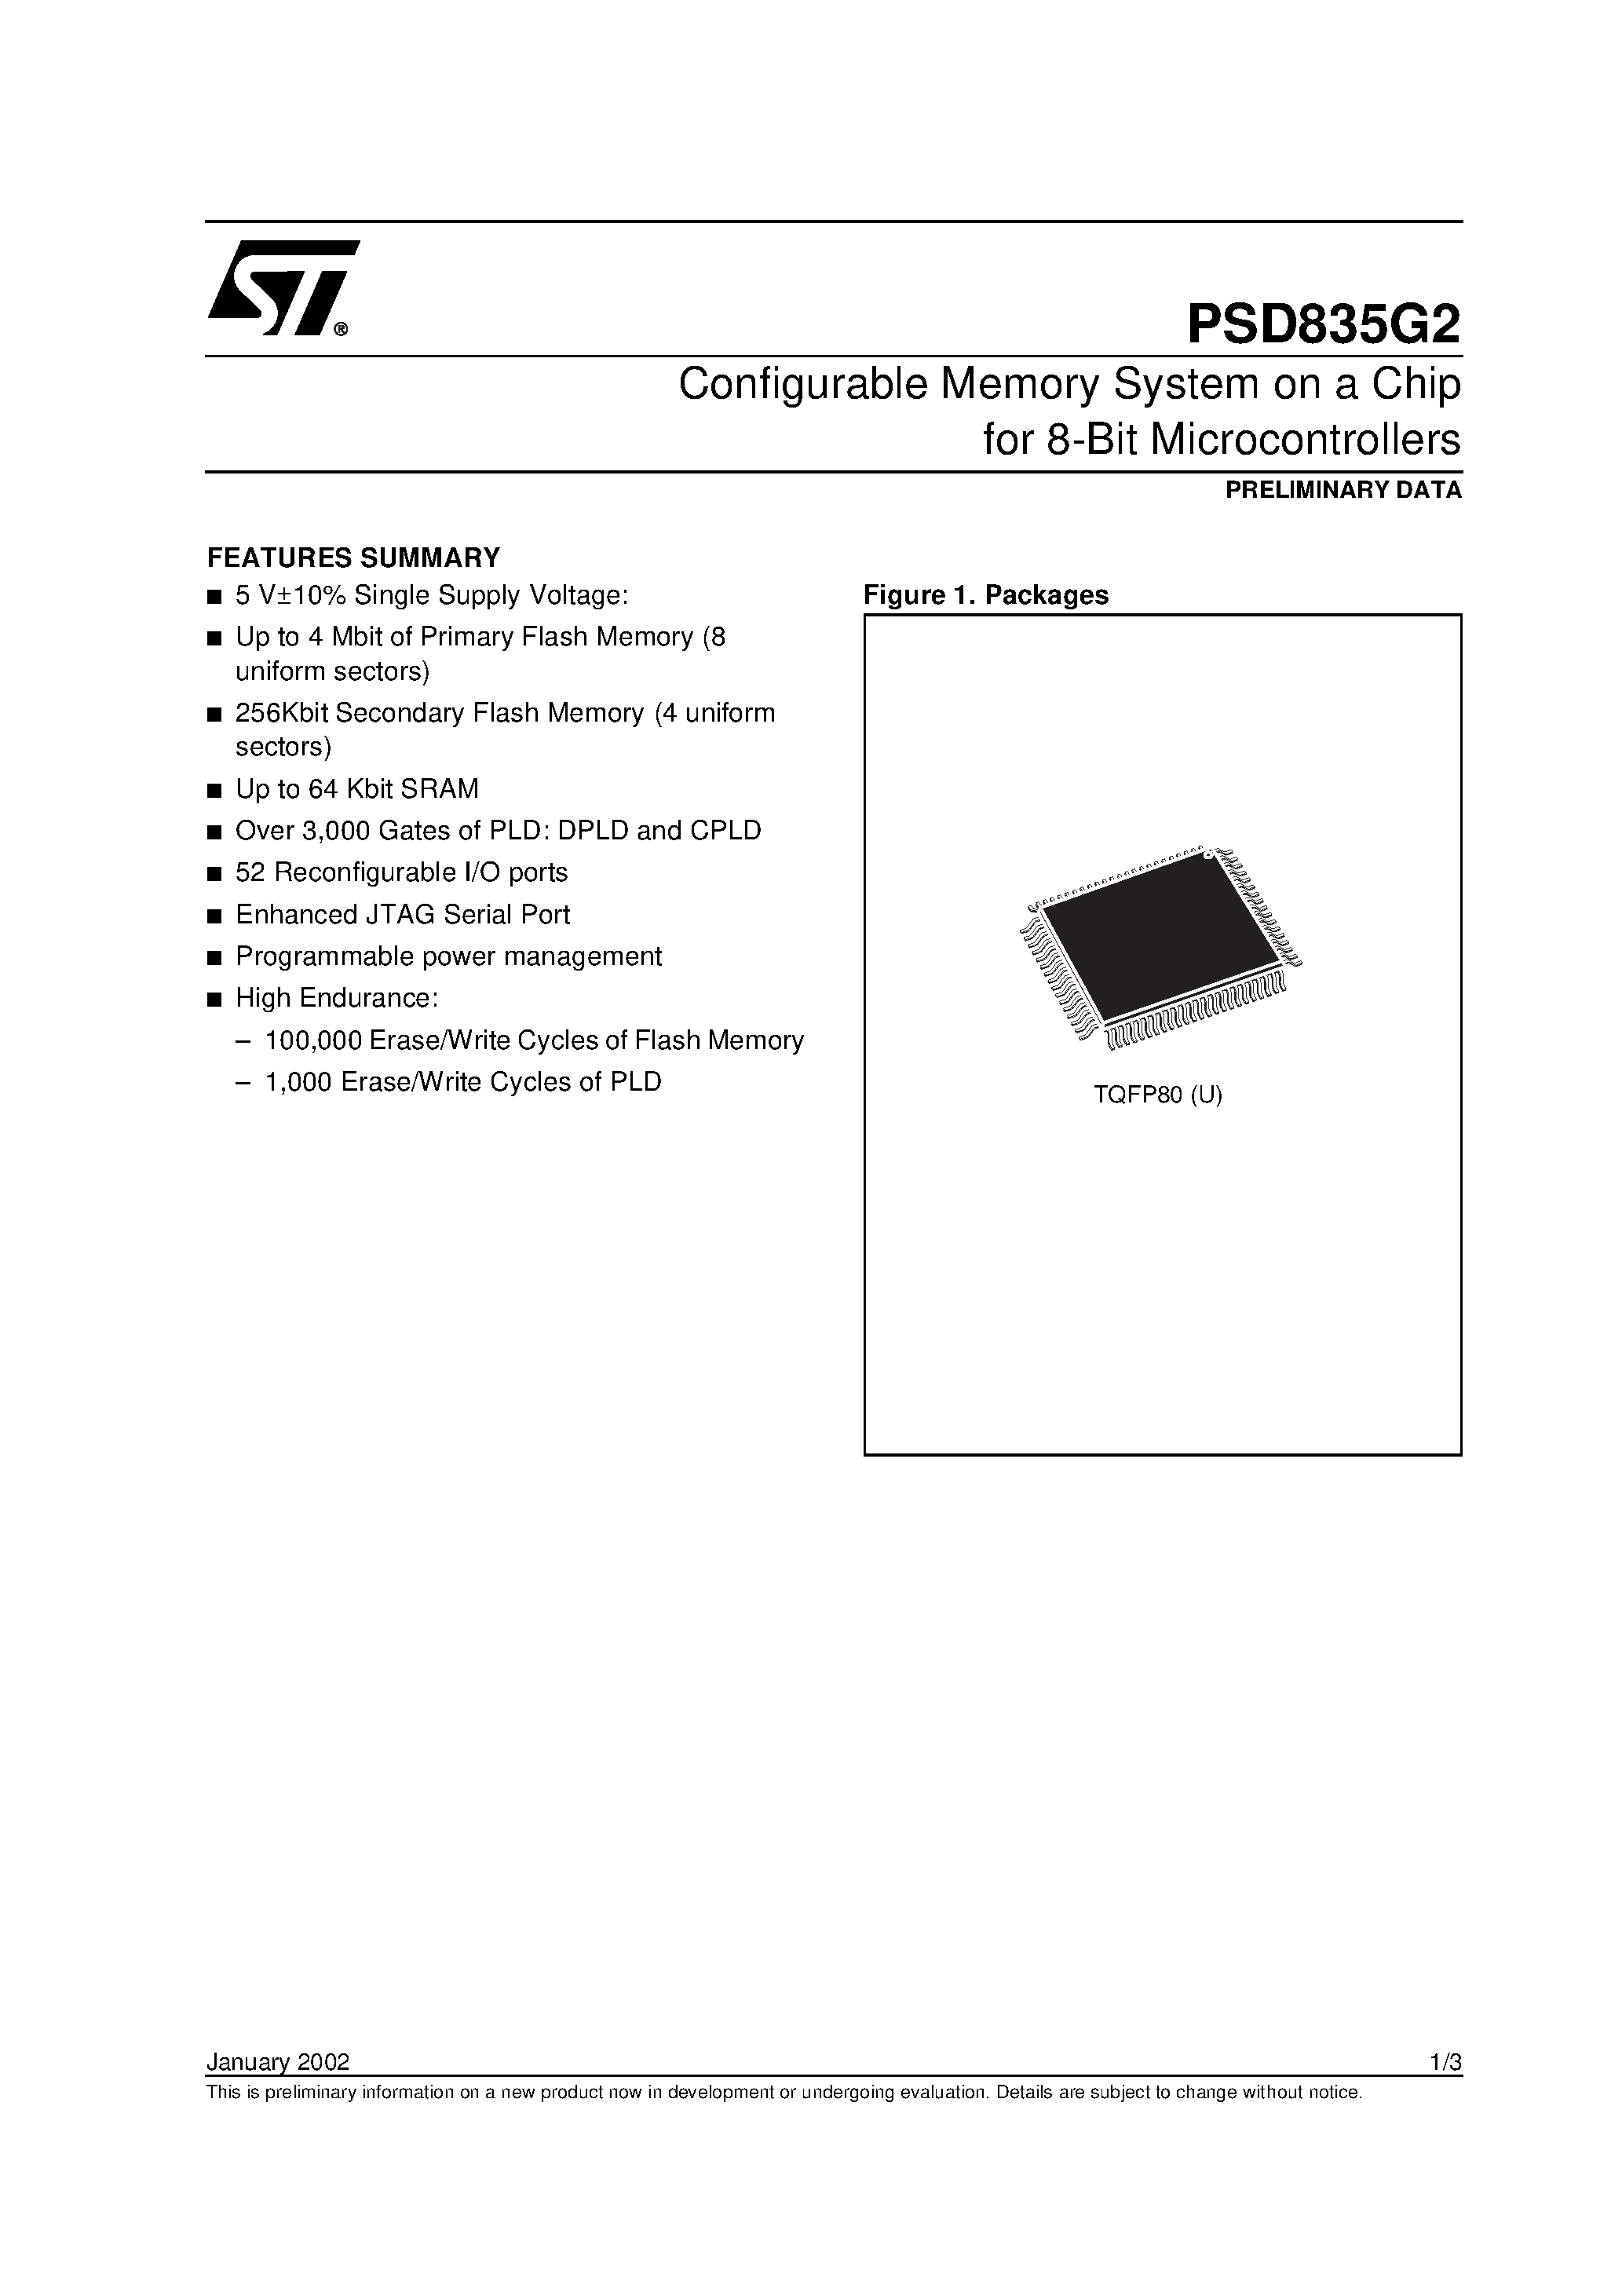 Datasheet PSD835F2-A-20B81I - Configurable Memory System on a Chip for 8-Bit Microcontrollers page 1